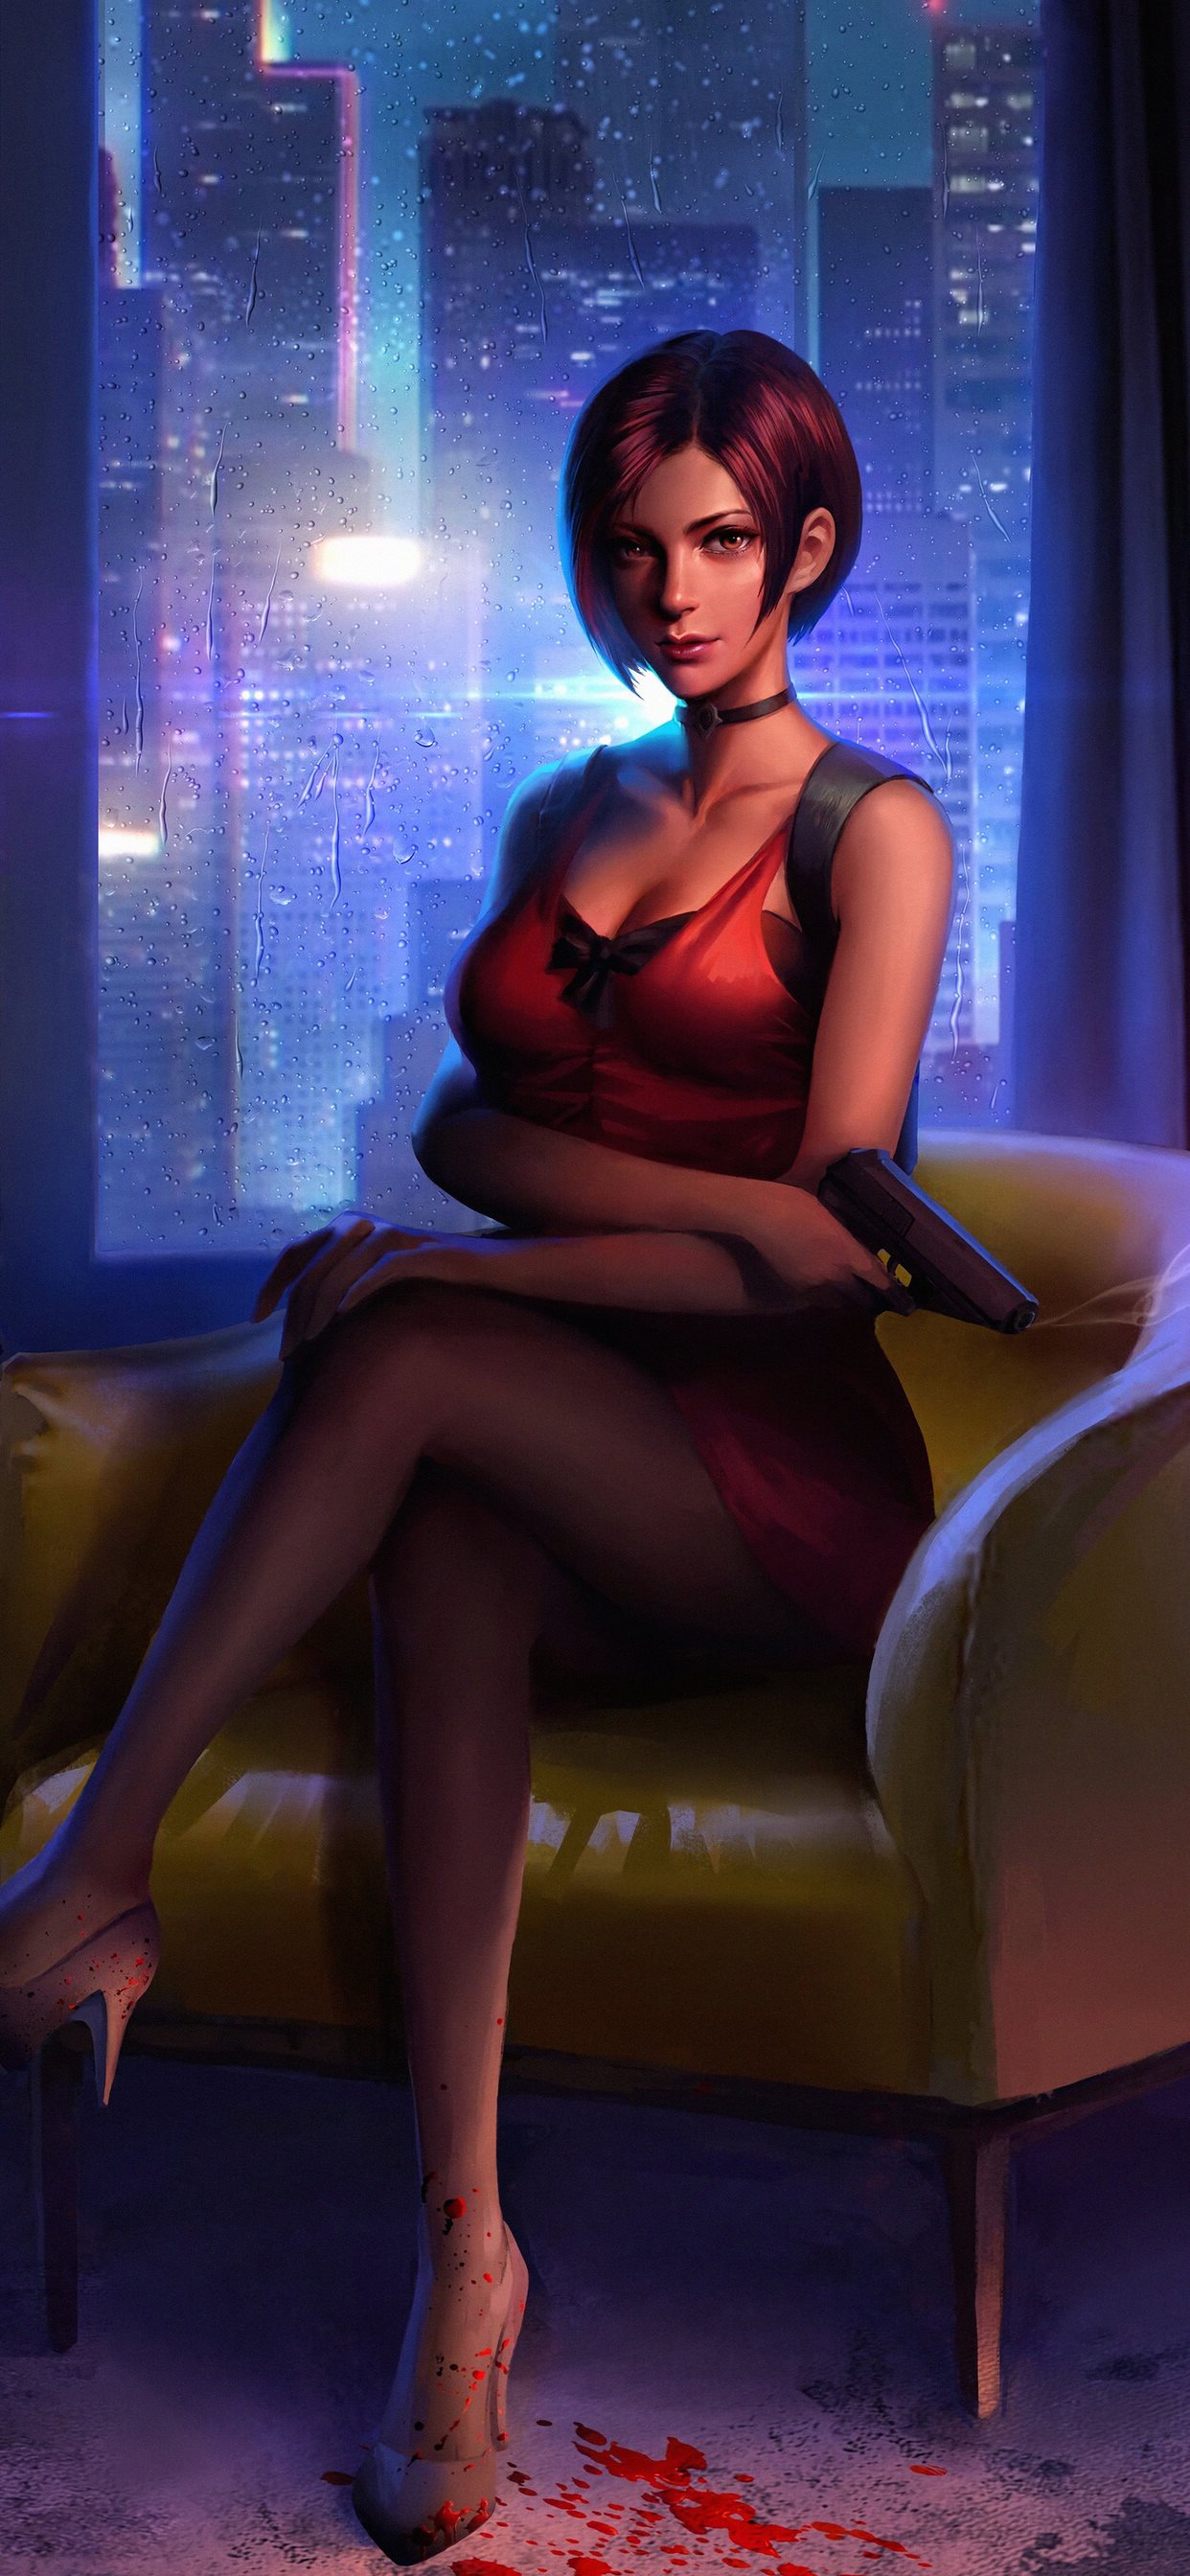 ada wong resident evil 2 fictional character 4k iPhone X Wallpapers